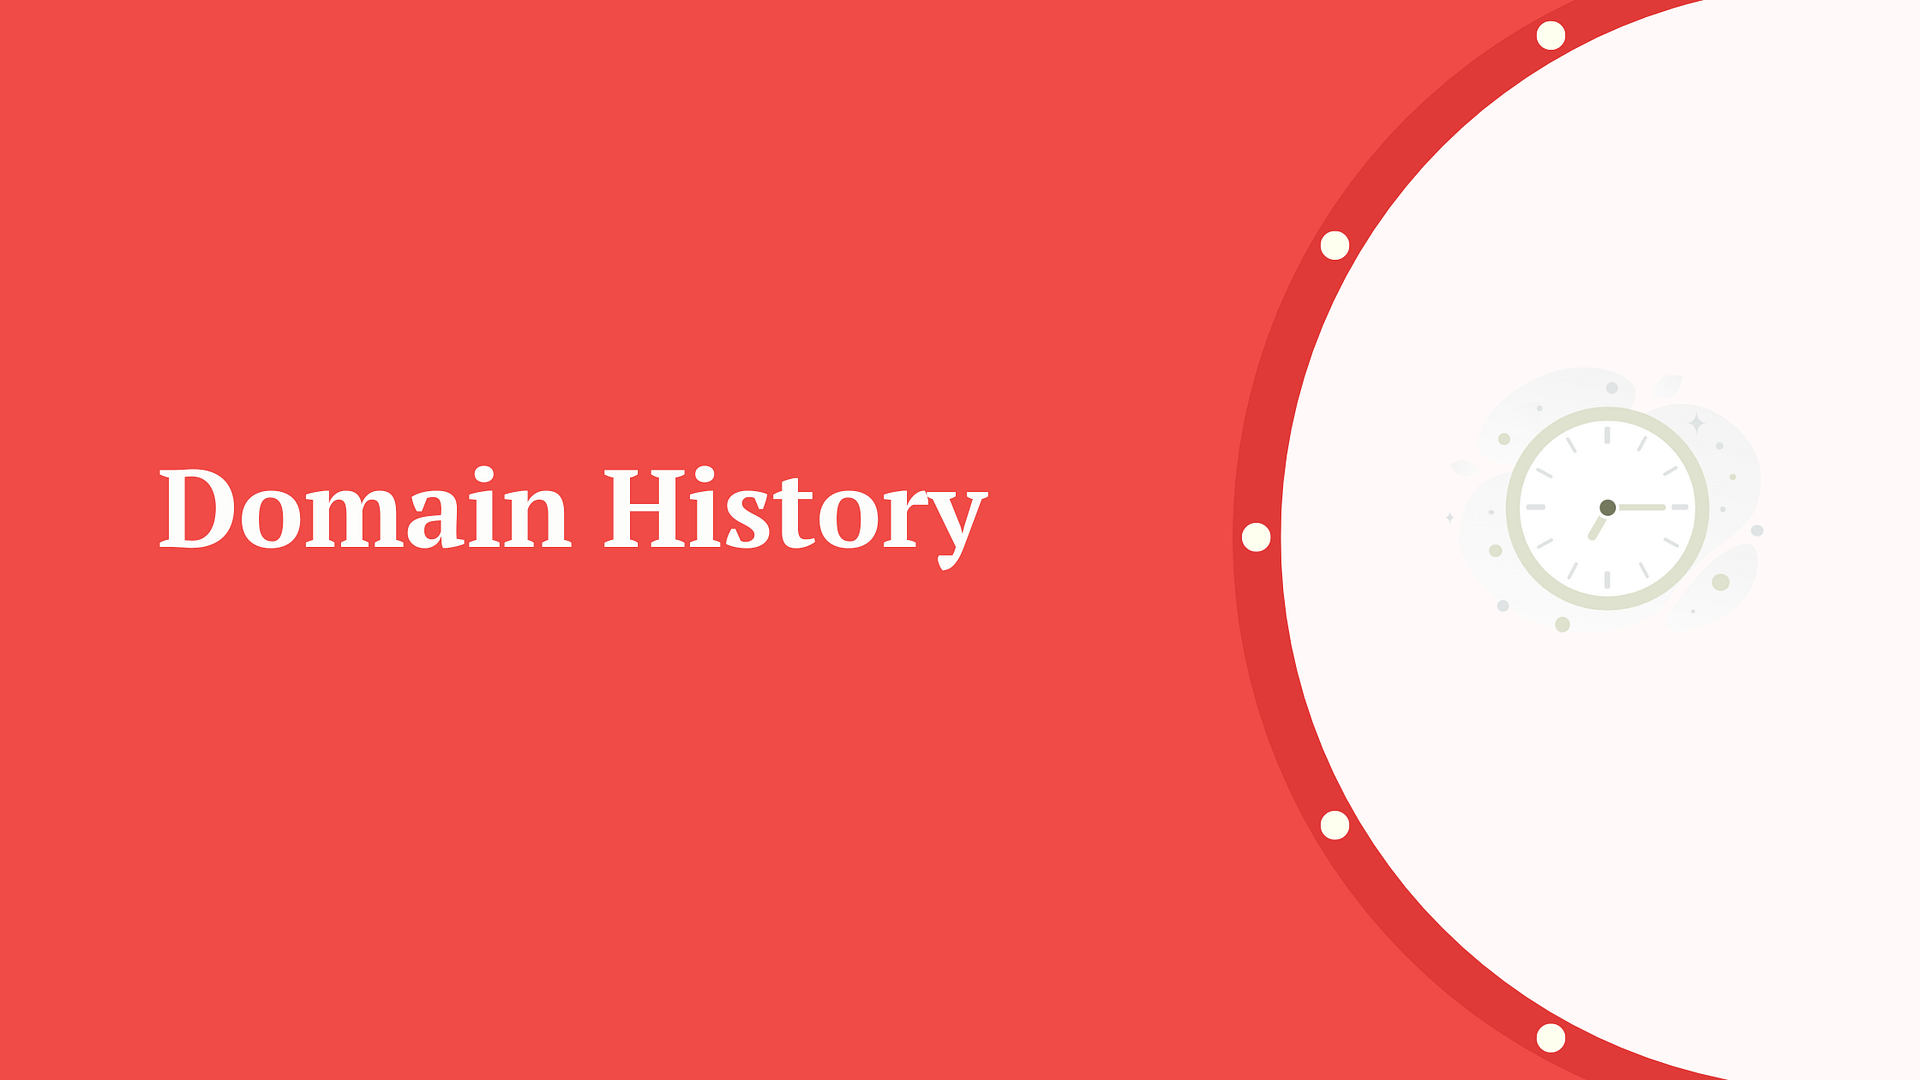 Whois History - DomainTools